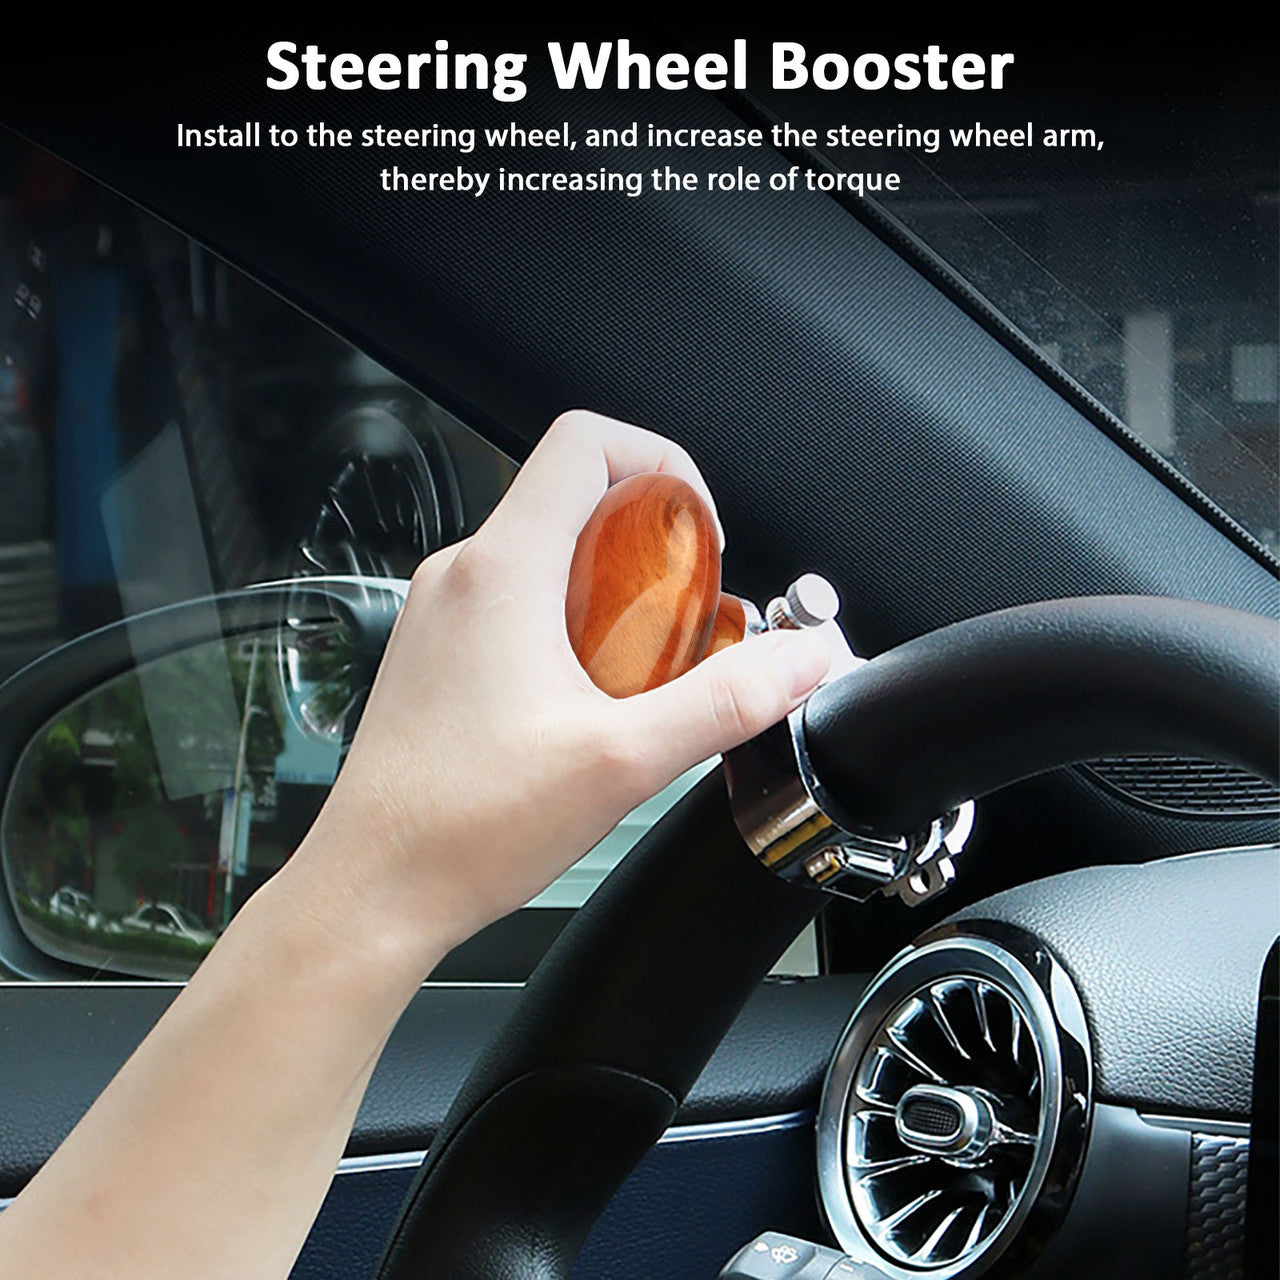 Car Steering Wheel Booster with a Retro Design, Adjustable and is Scratch Resistant